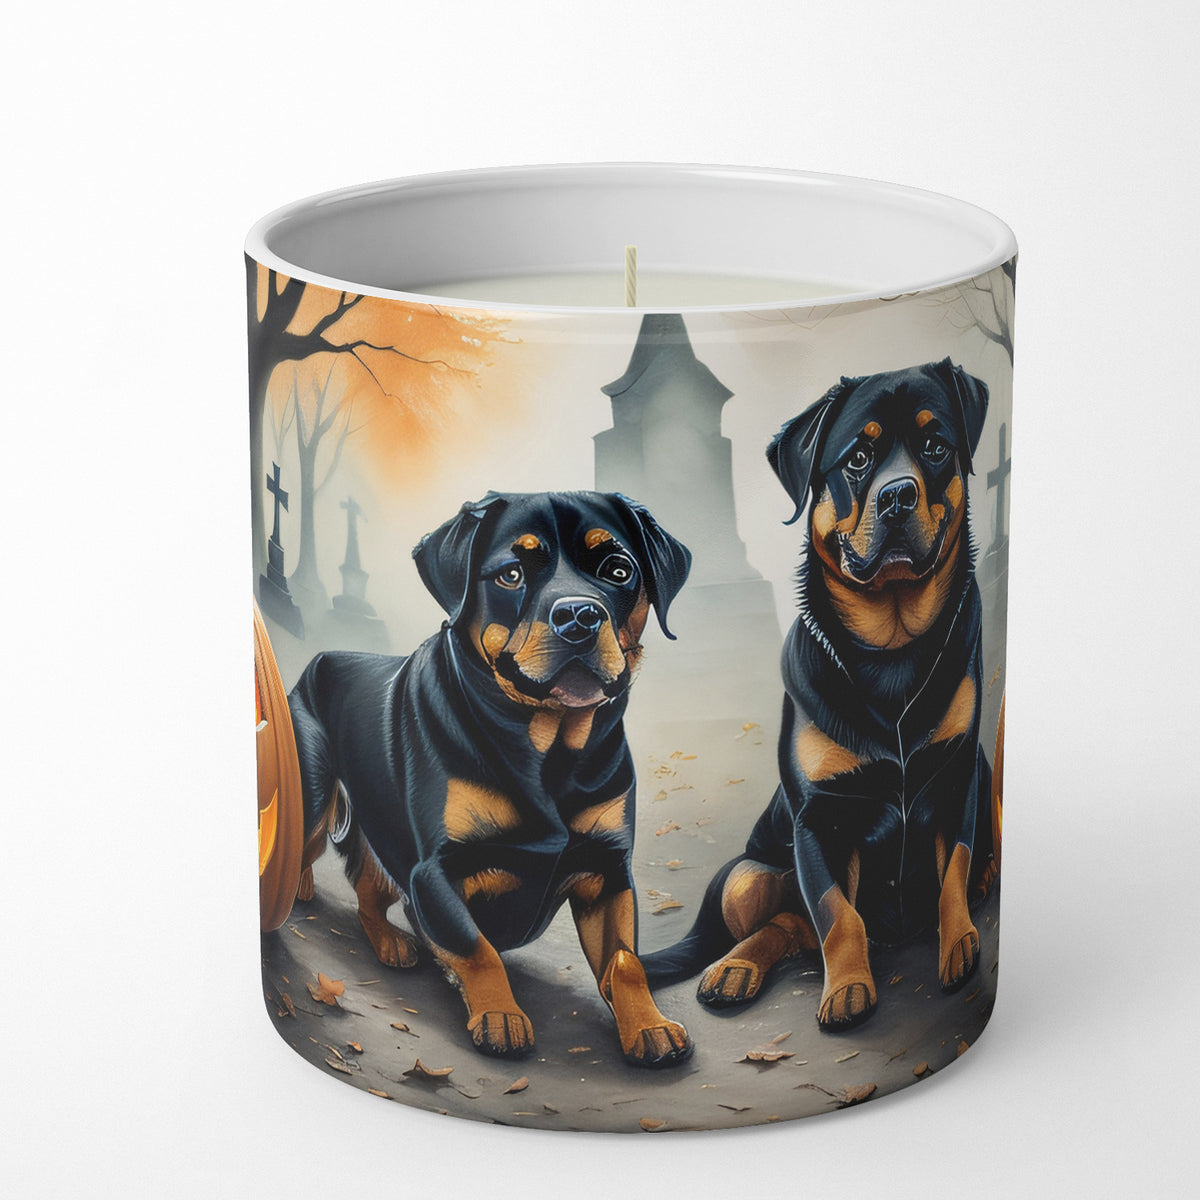 Buy this Rottweiler Spooky Halloween Decorative Soy Candle